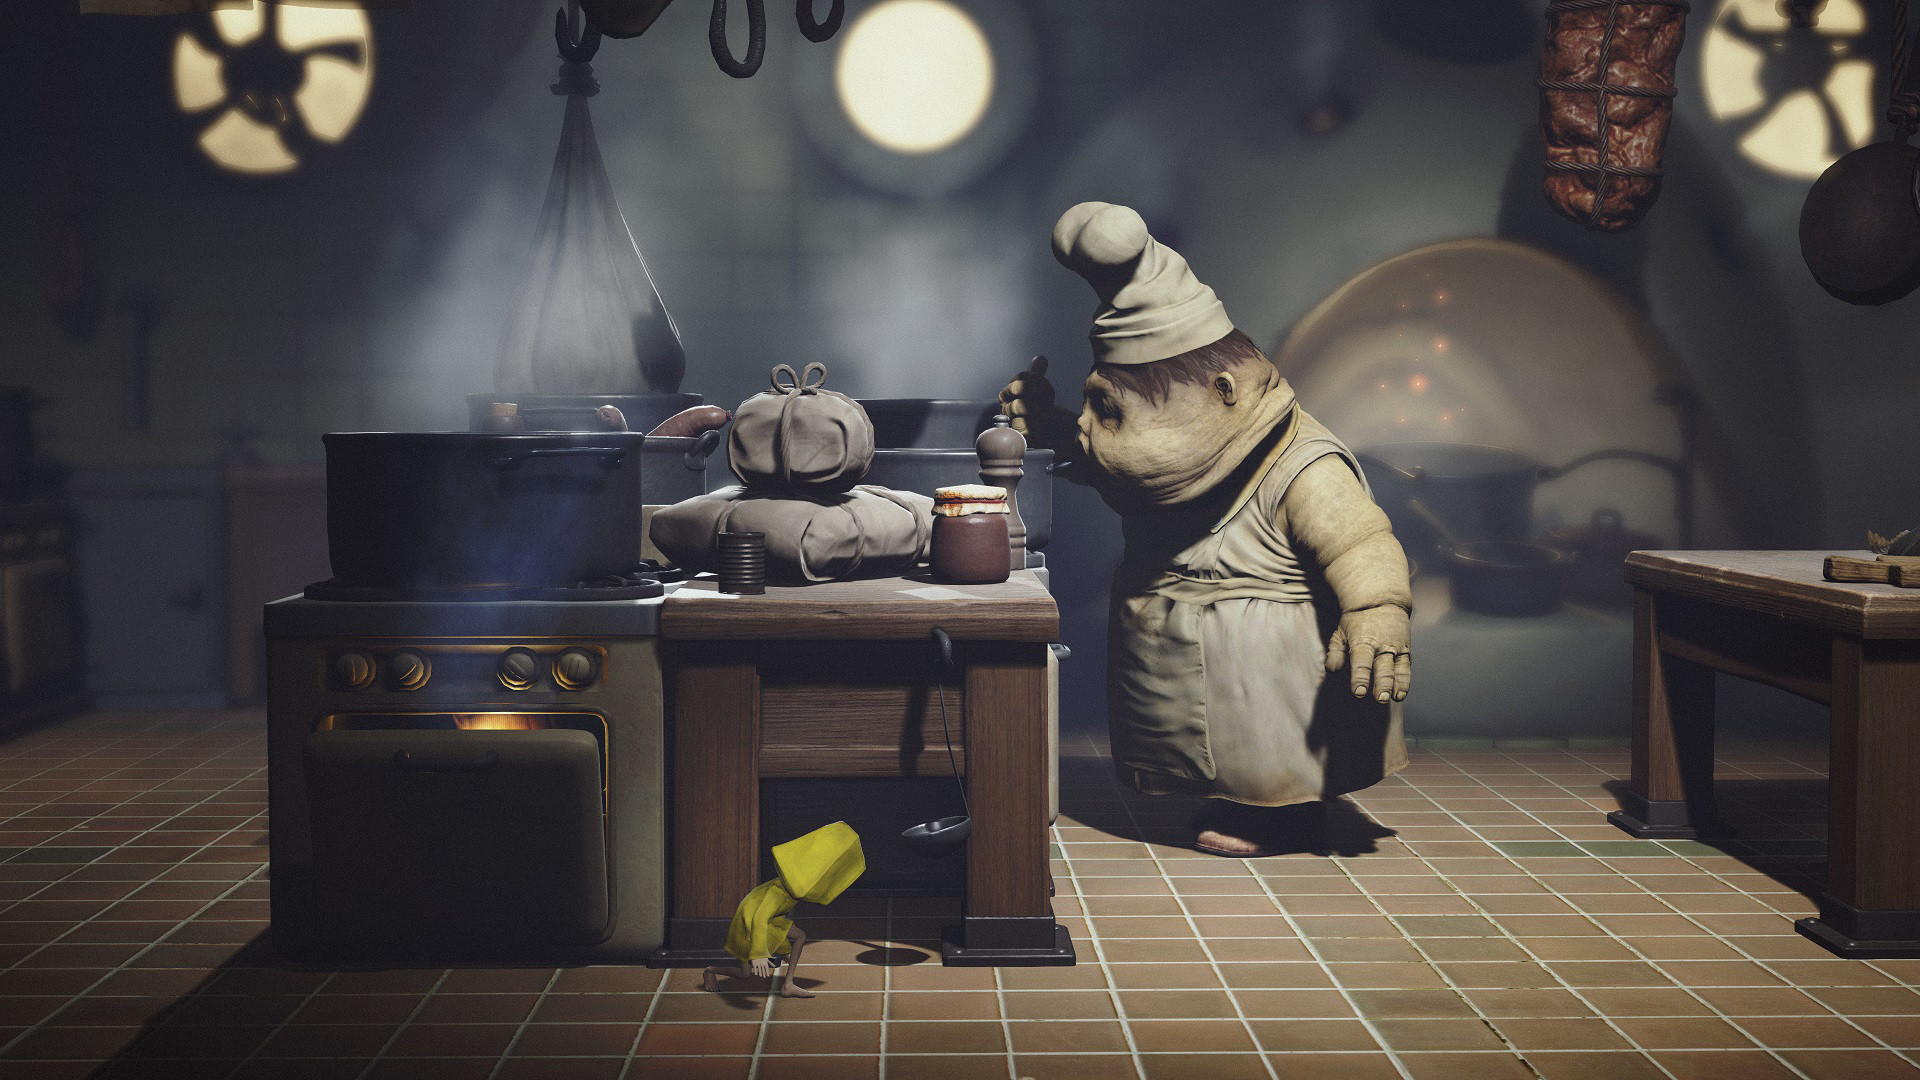 Little Nightmares - A game that tells almost it's entire story through its environment.